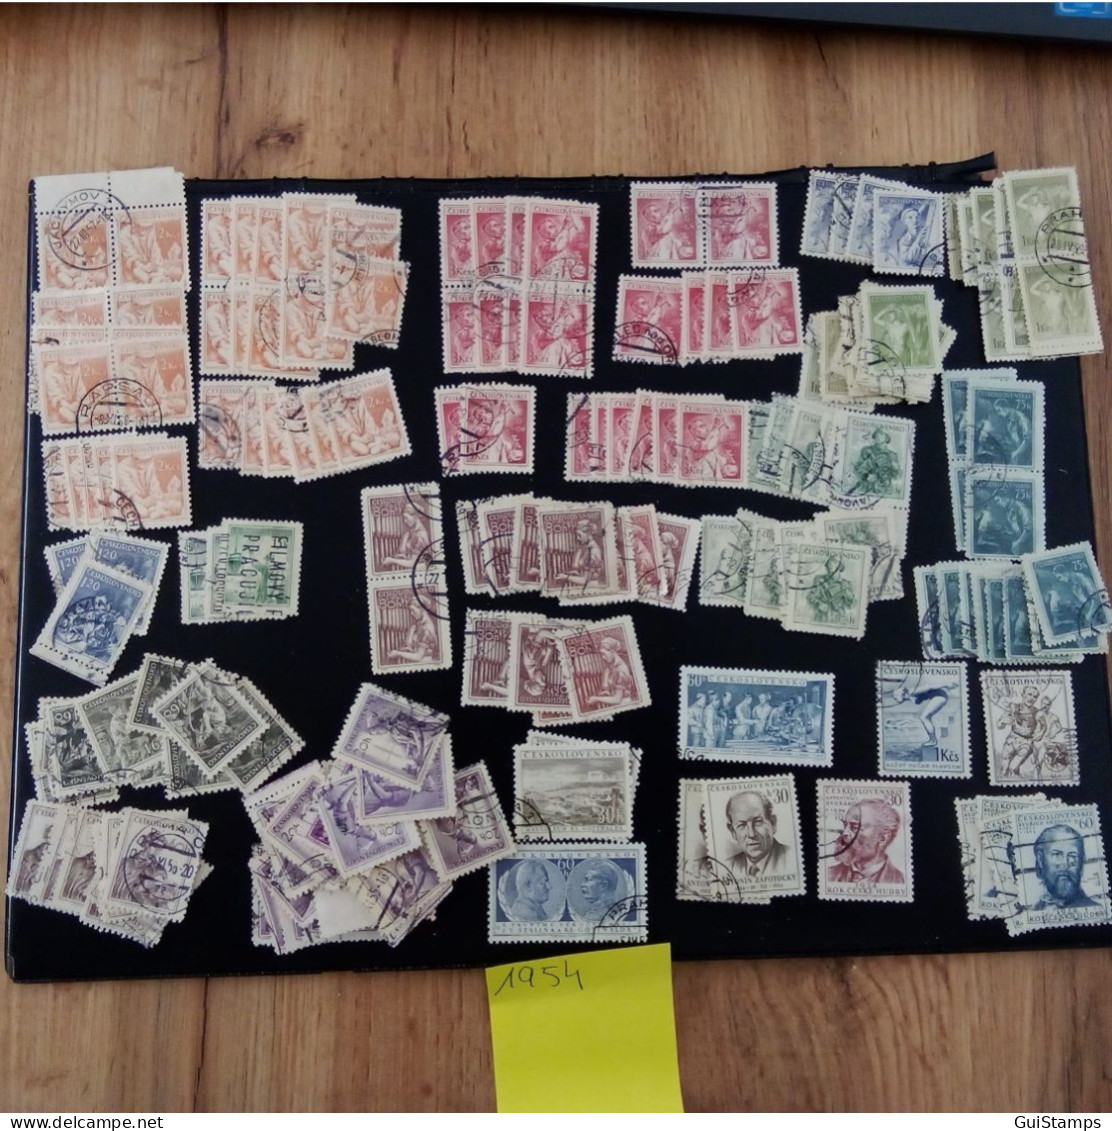 Stamps Czechoslovakia 1950 Do 1959 - Rare Selection Small Price - Used Stamps